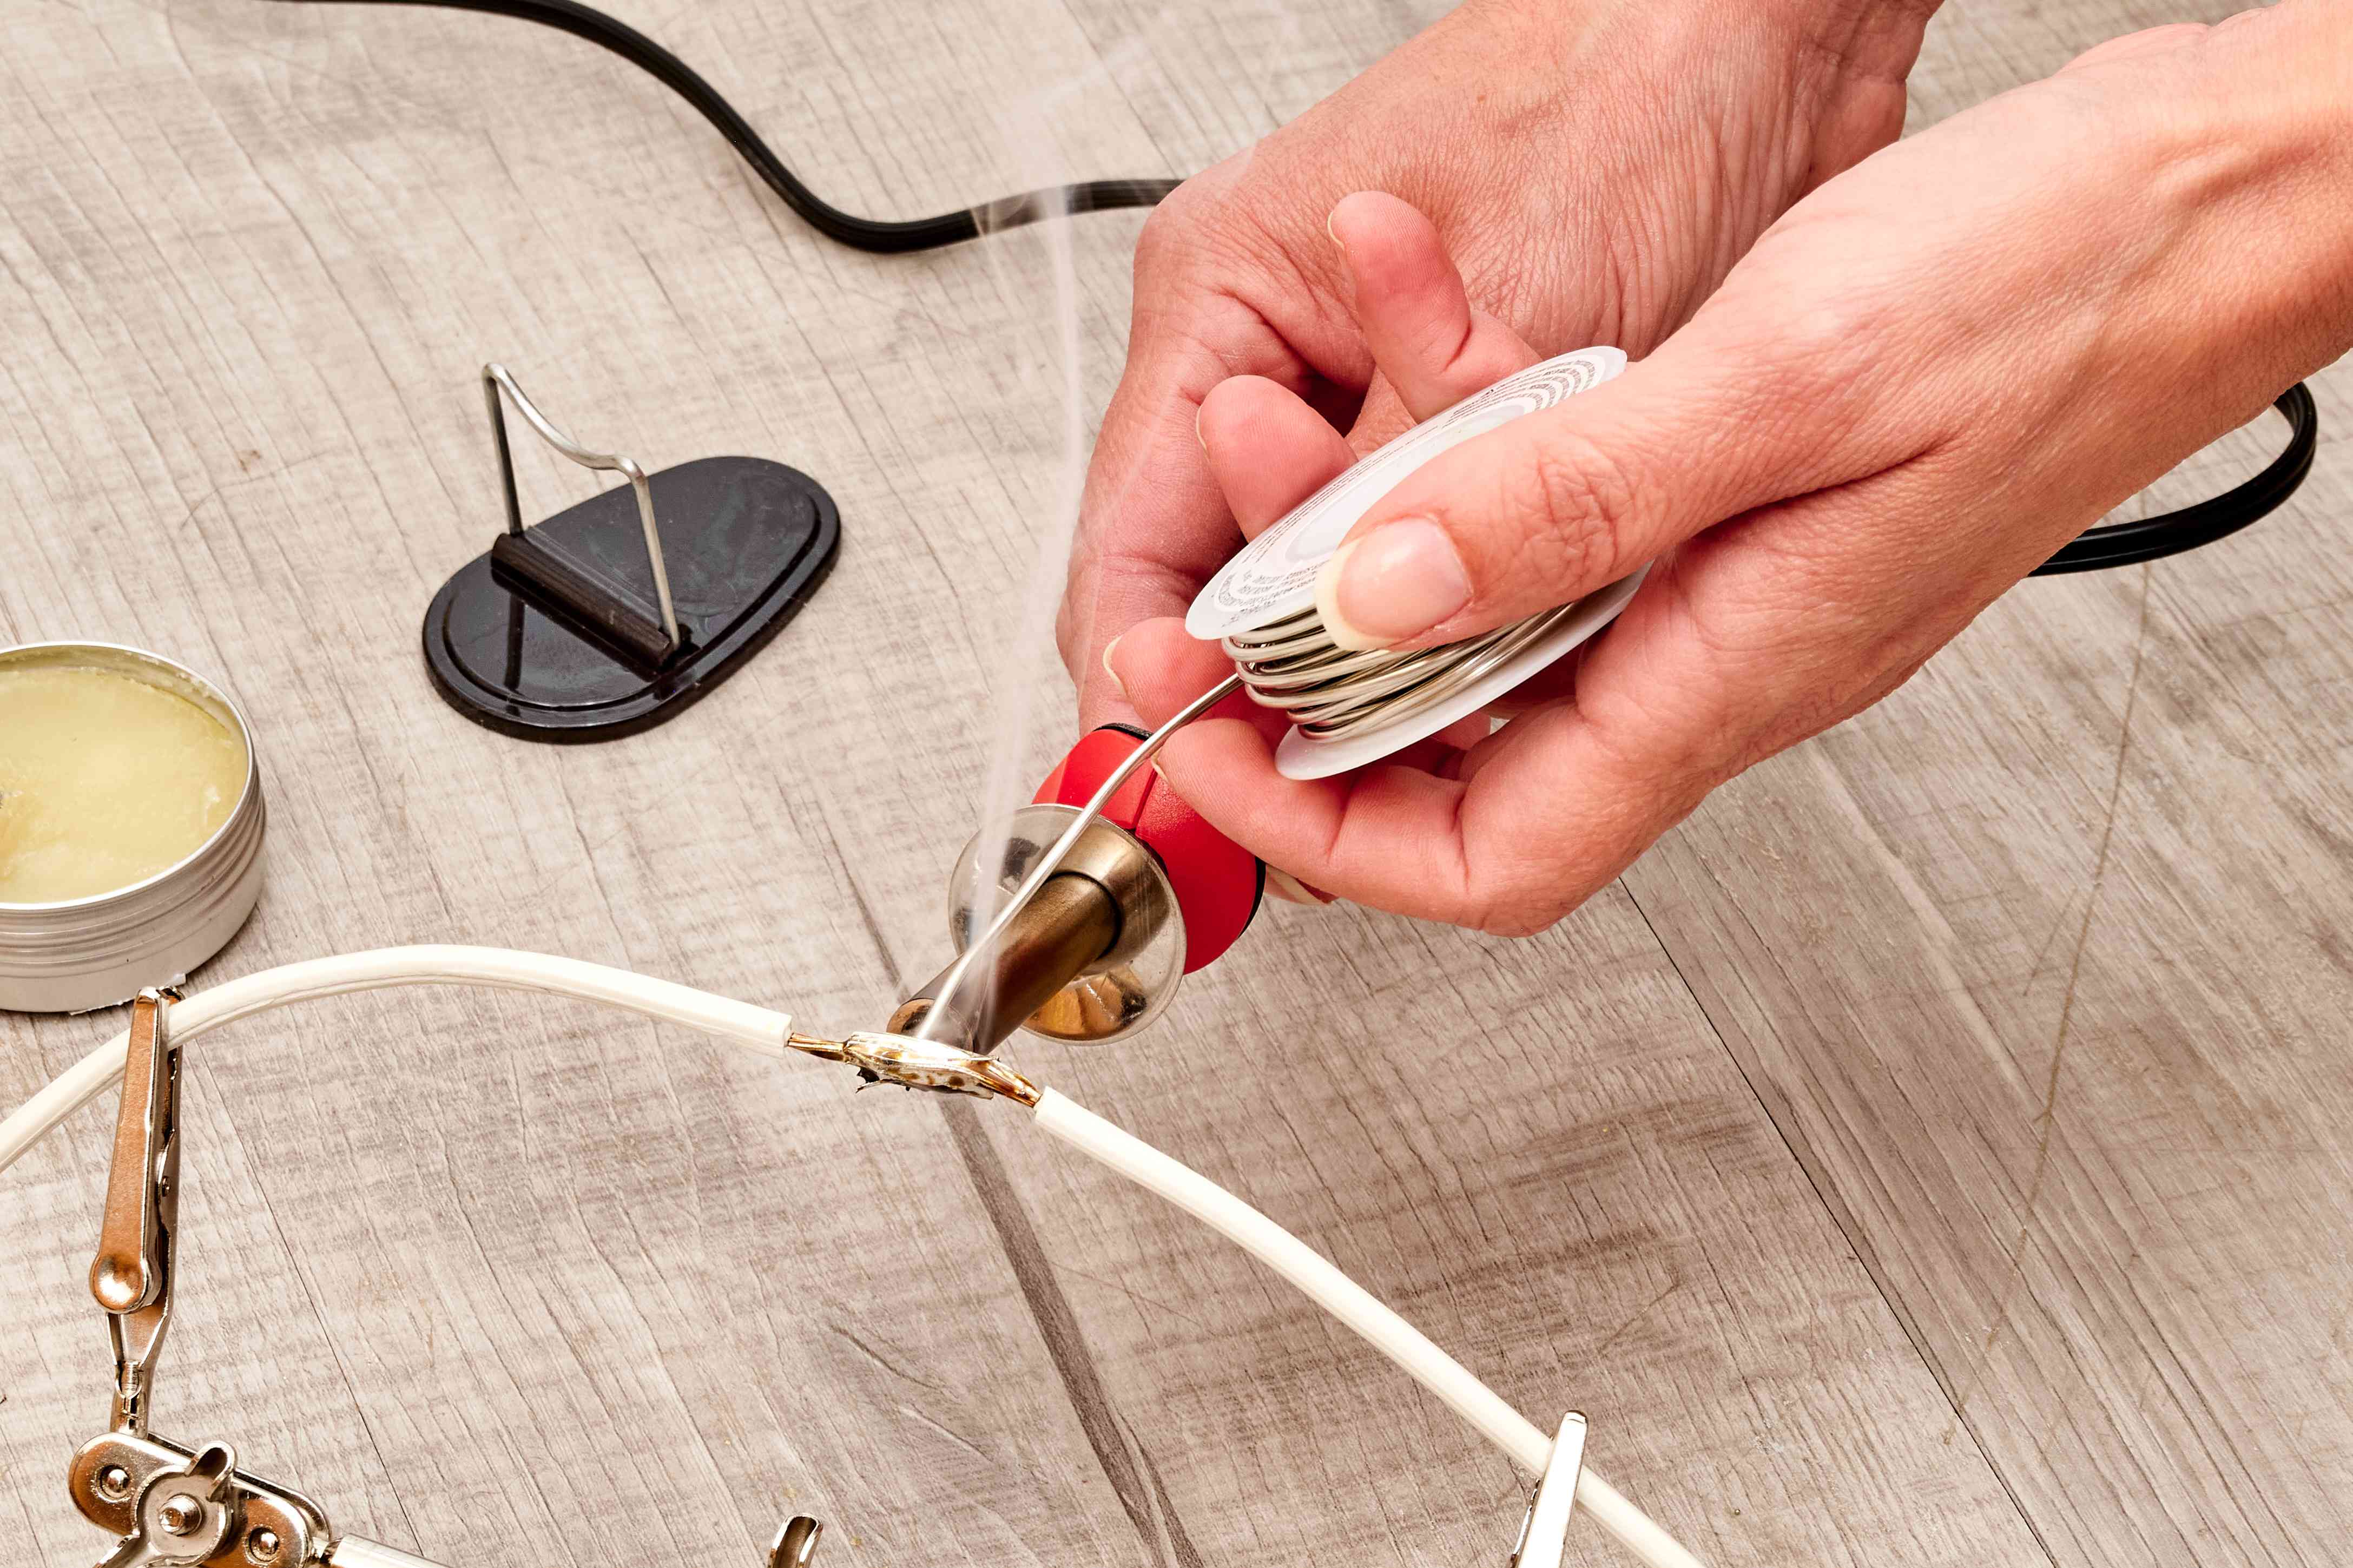 How to Solder a Wire to a Terminal